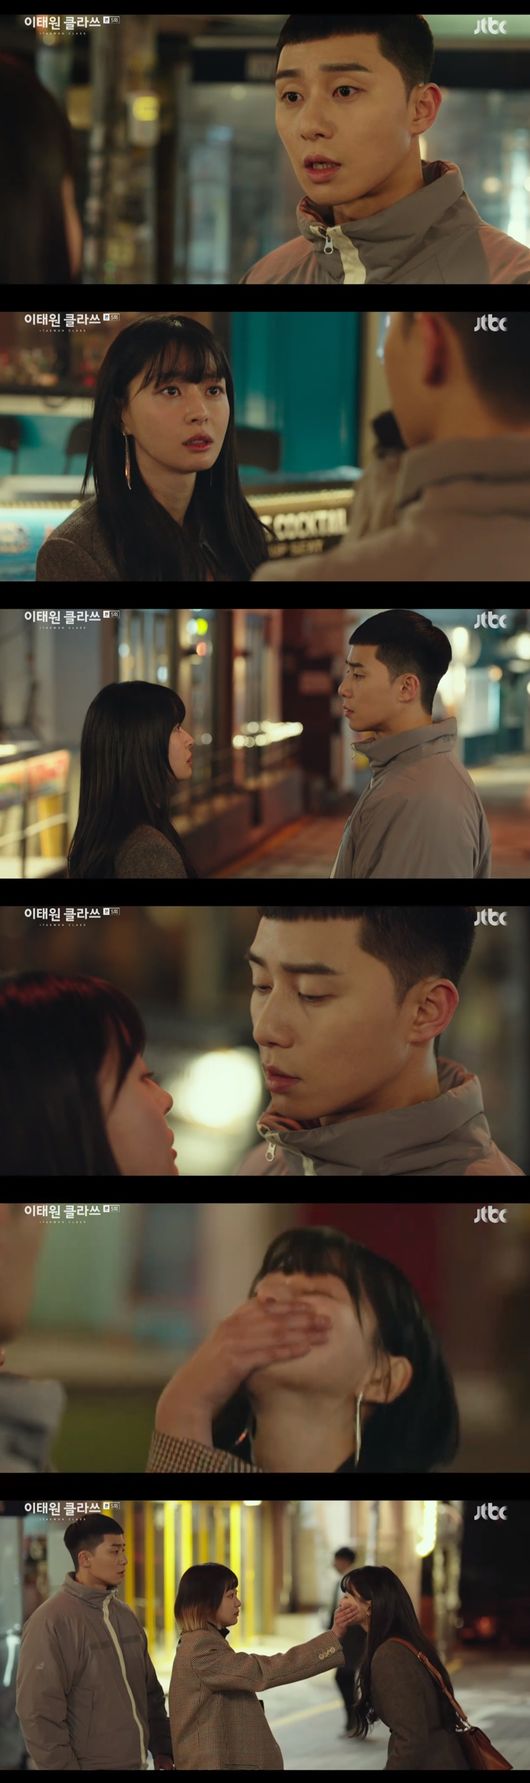 Kim Da-mi disrupts the gap between Park Seo-joon and Kwon Nara.On JTBCs Itae One Clath, Joe-yool Lee (Kim Da-mi) interrupted the kisses of Park Seo-joon and Oh Soo-ah (Kwon Nara).Joe-yool Lee pointed out the problem of single night in front of the Roy, and was hired as the manager of single night by revealing his ability.After Joe-yool Lee came in, Sanbam started re-operating again and the customers did not stop, so sales also rose sharply.Jang Dae-hee (Yoo Jae-myung) began checking Sanbam. Jang Dae-hee told Oh Soo-ah, Is it the Sanbam Parks Friend store? I got up again after being suspended from business.Oh Soo-ah said, I just opened it. You dont have to worry about it. But Jang Dae-hee said, Do you really think so?Is it because Im Friend, so Im defending it?Oh Soo-ah was troubled between Park and Jang Dae-hee and walked down the street and yelled, Its crazy. Then, Park took Oh Soo-ahs hand.Oh Soo-ah asked, Are you not irritating me, too - how do you not want to be able to do that?Oh Soo-ah asked, I have a question: Why is business going well? Cant you tell my friend?Park pointed to Joe-yol Lee, who was next to him, saying, I saved a competent manager.Oh Soo-ah asked, Im not sorry for you at all. Im not the most precious and most fond of all. Is that wrong?So Park said, Of course. But Oh Soo-ah said, You are so unlucky to pretend to know everything alone.It makes people feel dirty on the subject of middle school graduates. Why are you so hard, dont do it, I cant help you, youve done your best in your life and youre not at fault, said Parksae.Please dont say that, Oh Soo-ah said.Oh Soo-ah then said, The truth is youre always too much for me, and inside, Shine. Oh Soo-ah approached as if he would kiss Roy.But then Joe-yool Lee shut Oh Soo-ah in the mouth.Joe-yool Lee grabbed Oh Soo-ahs mouth and said, Kiss without the consent of the other party is forced to commit: JTBC One Klath broadcast capture